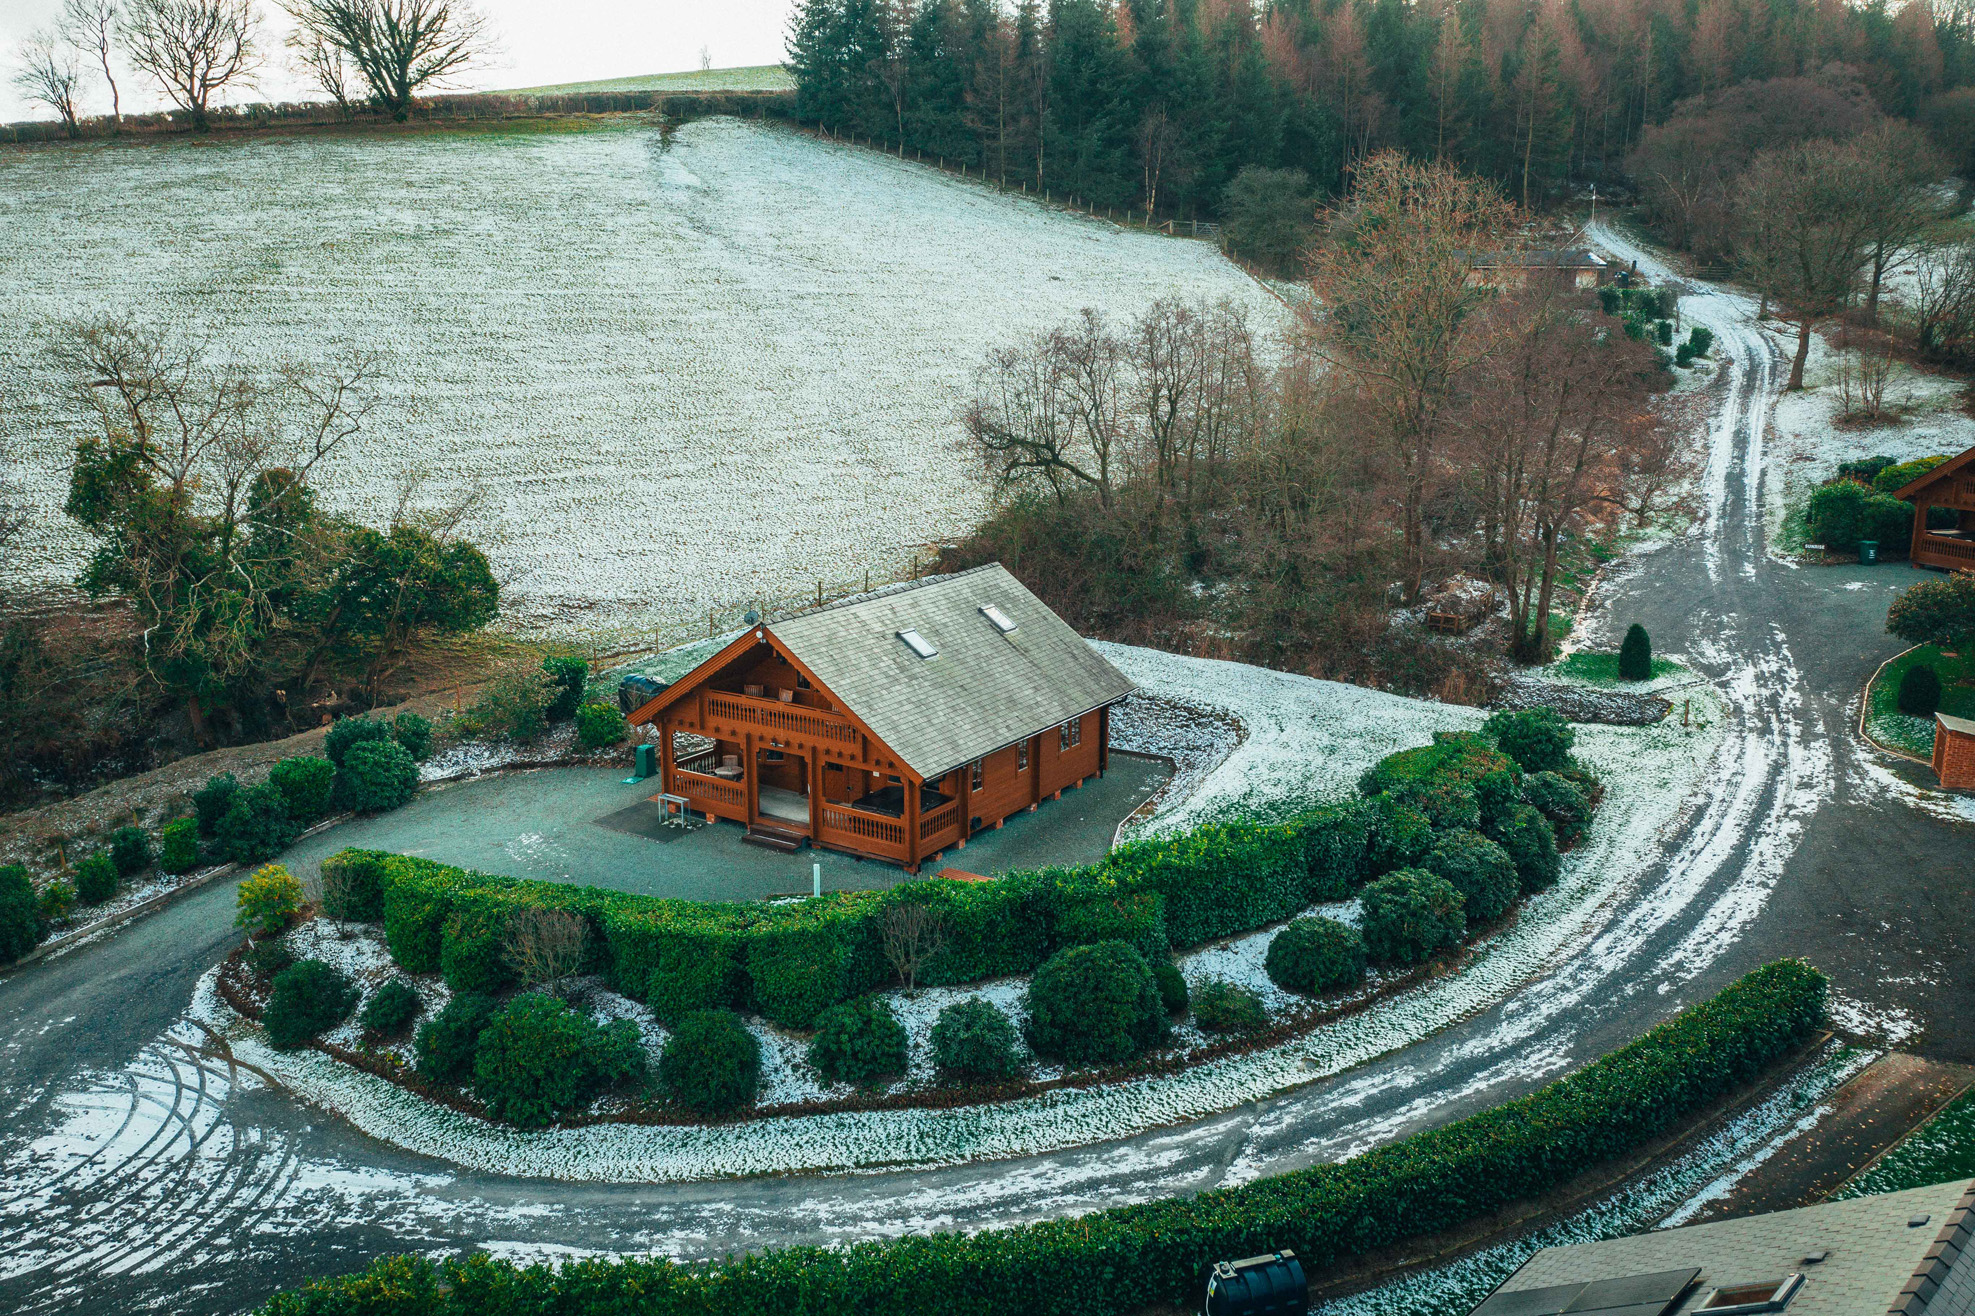 Ariel shot of Sunset luxury lodge in the winter with some light snow